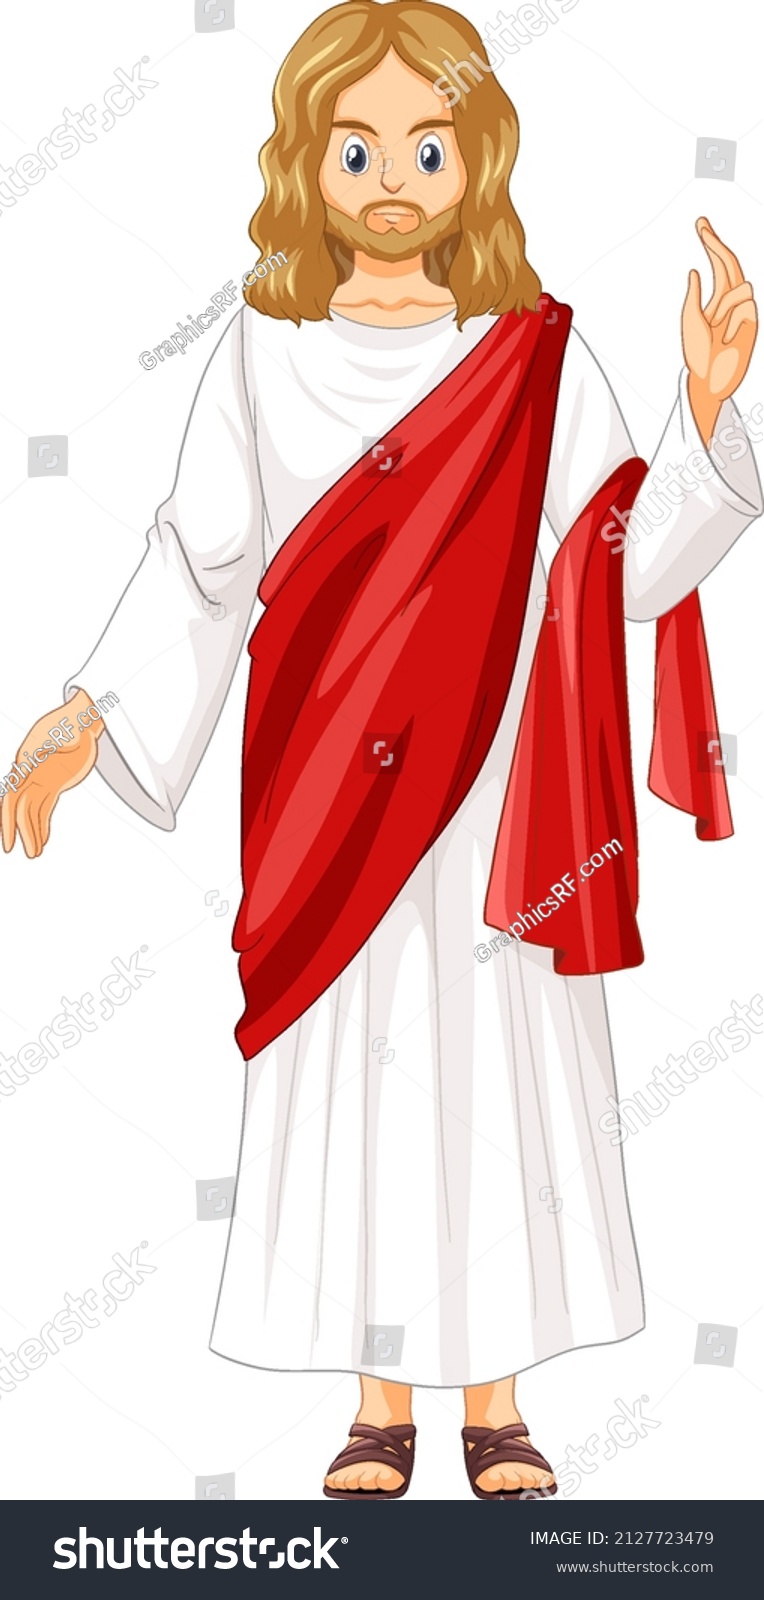 Jesus Cartoon Character On White Background Stock Vector (Royalty Free ...